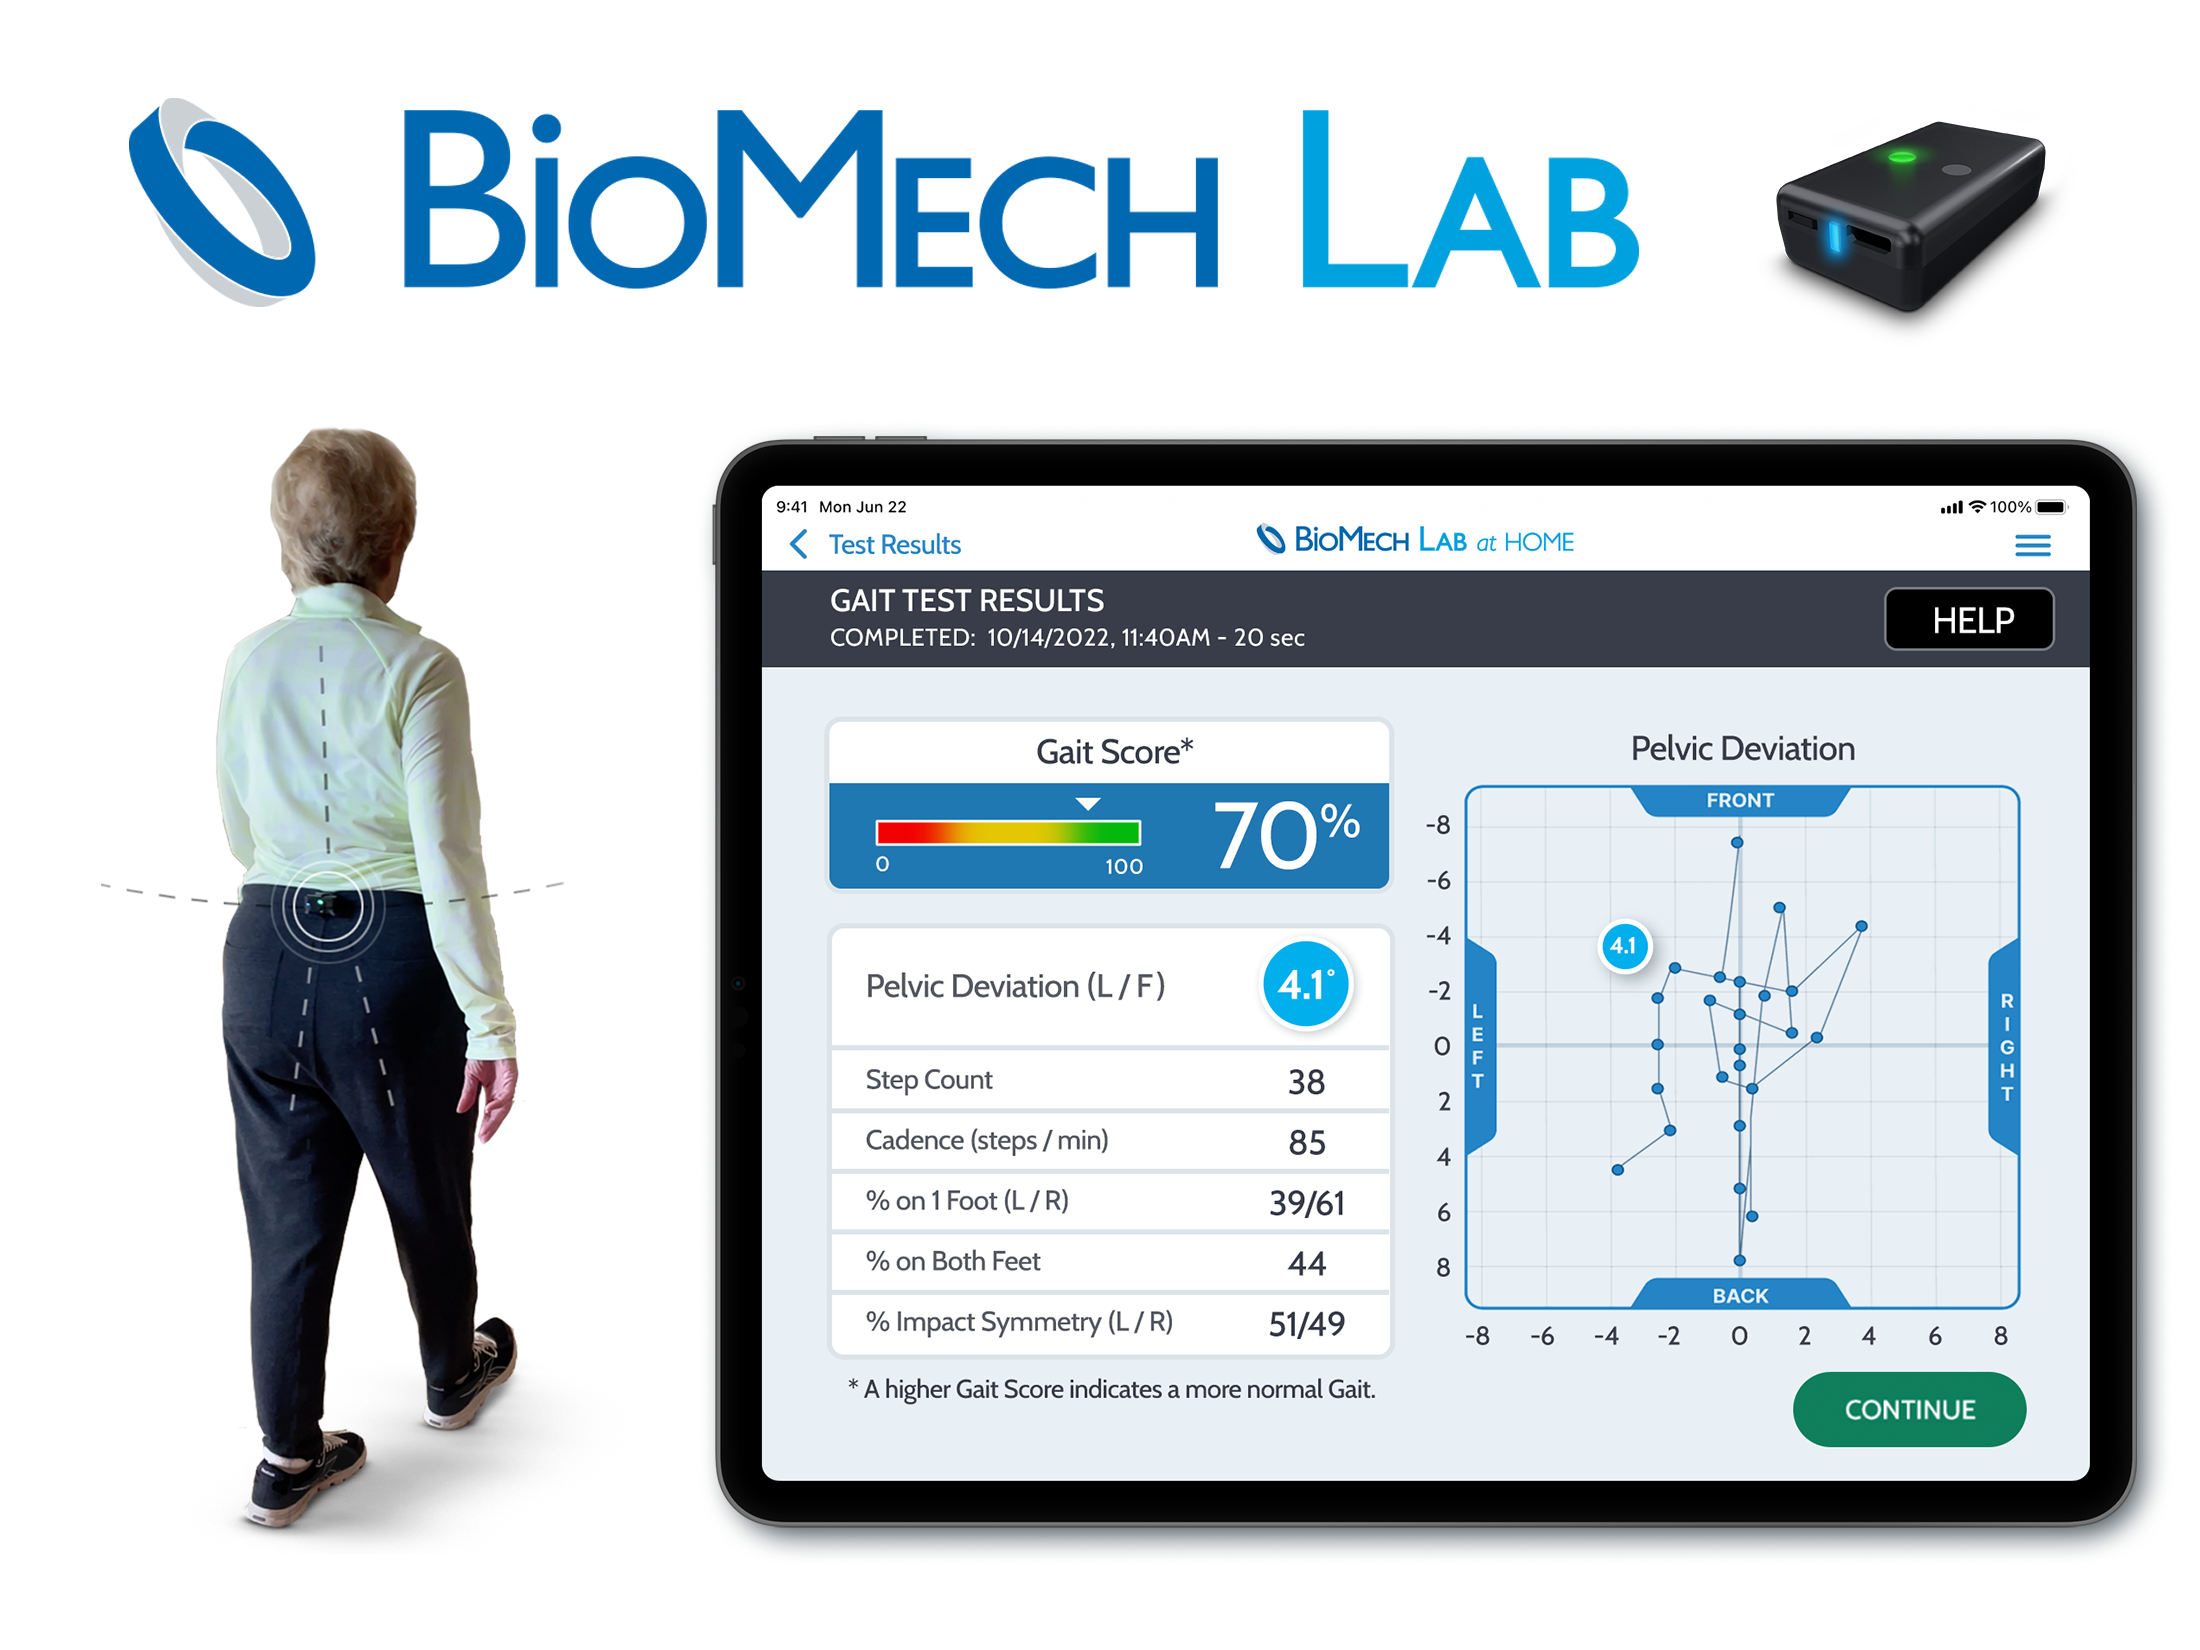 BioMech’s motion analytic solution, BioMech Lab, is driven by a proprietary AI engine that ingests motion data from their proprietary sensors to produce highly accurate, precise, and reproducible analyses.